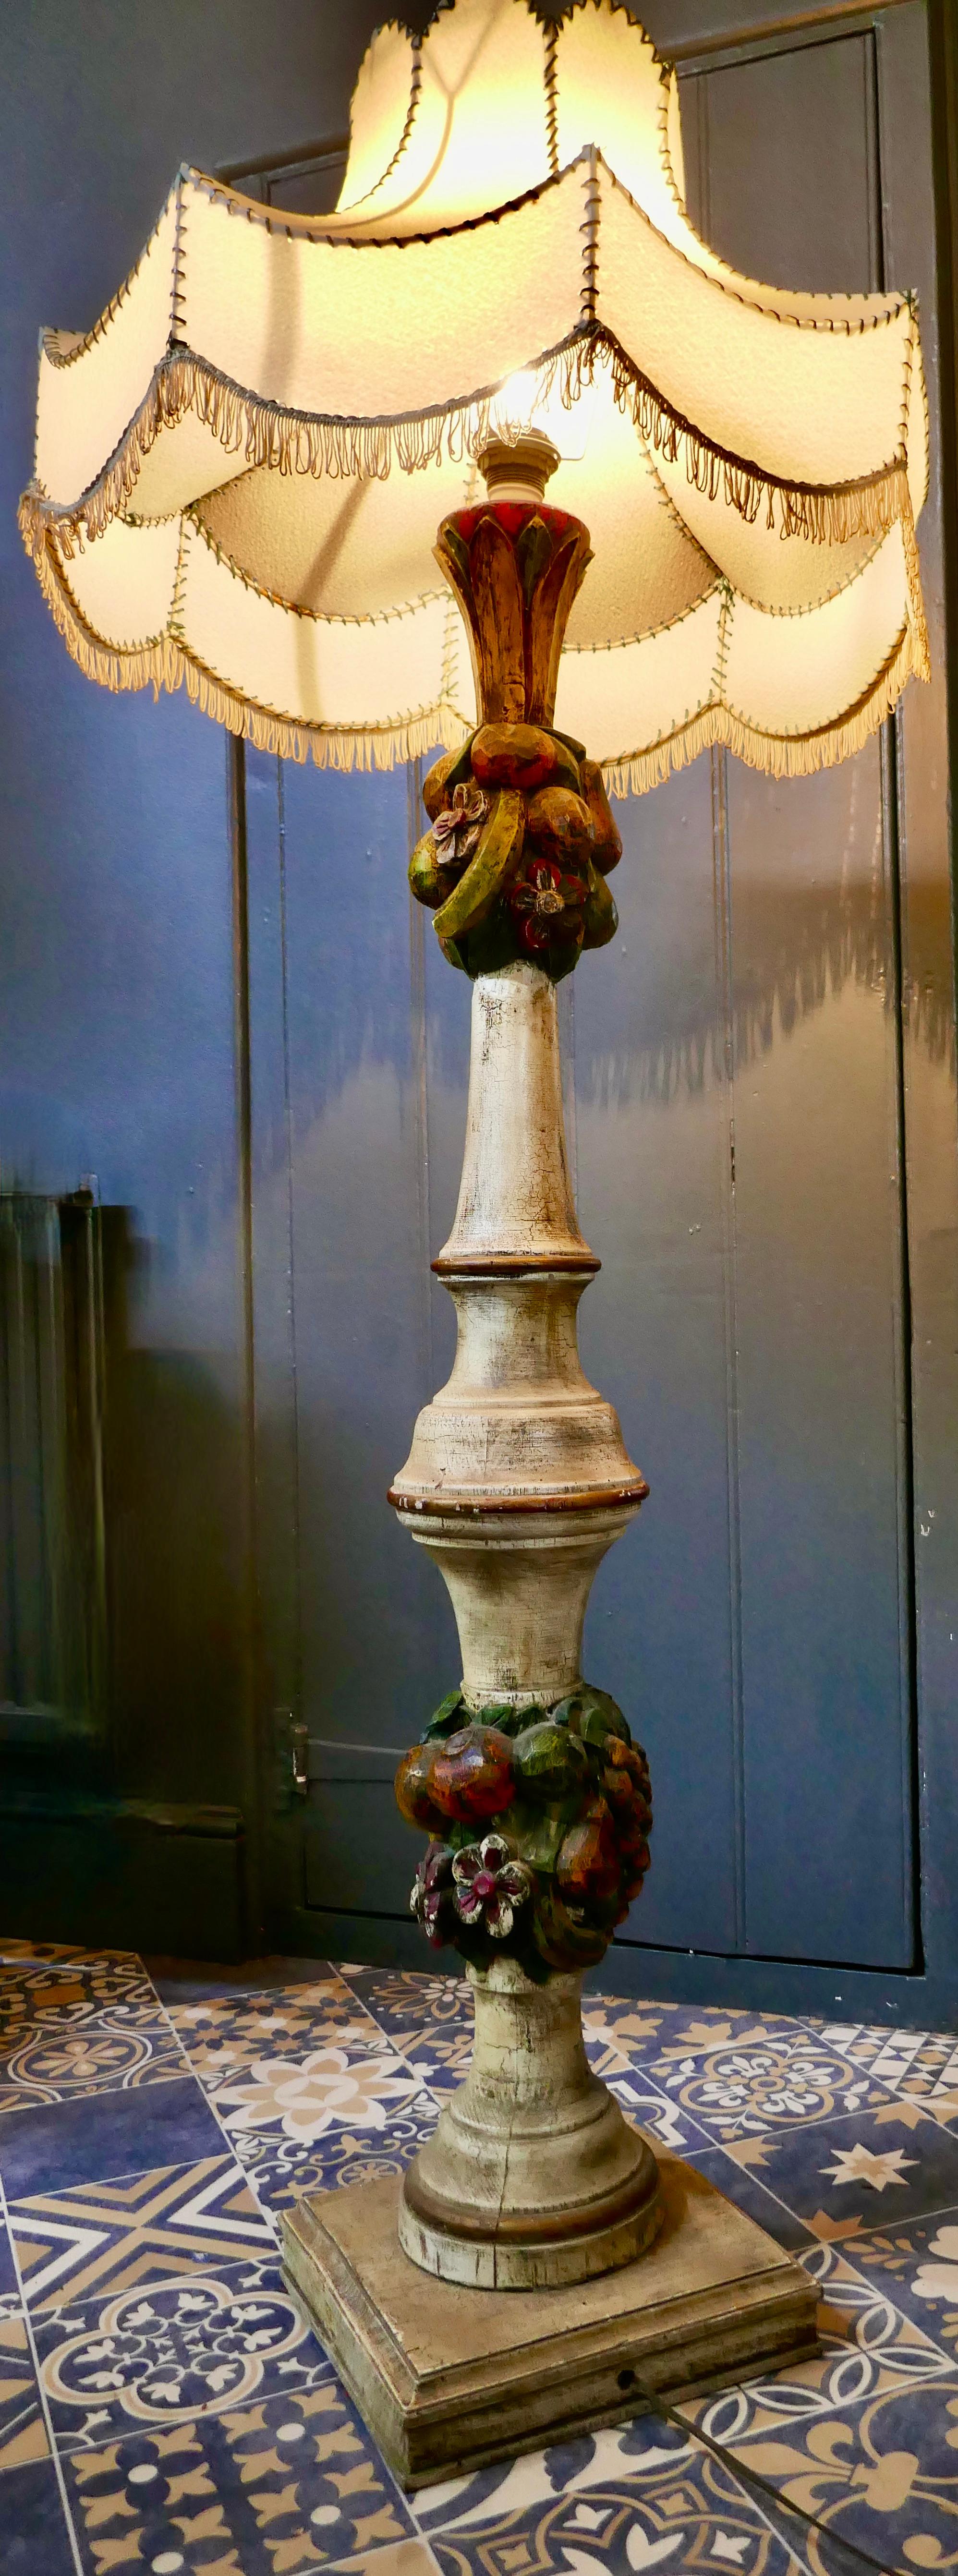 Spanish Folk Art floor standing standard lamp

 A traditionally turned, carved and painted piece from Spain. This wooden lamp stands on a square base, it is stepped at floor level and has a large bulbous shape decorated with carved and painted